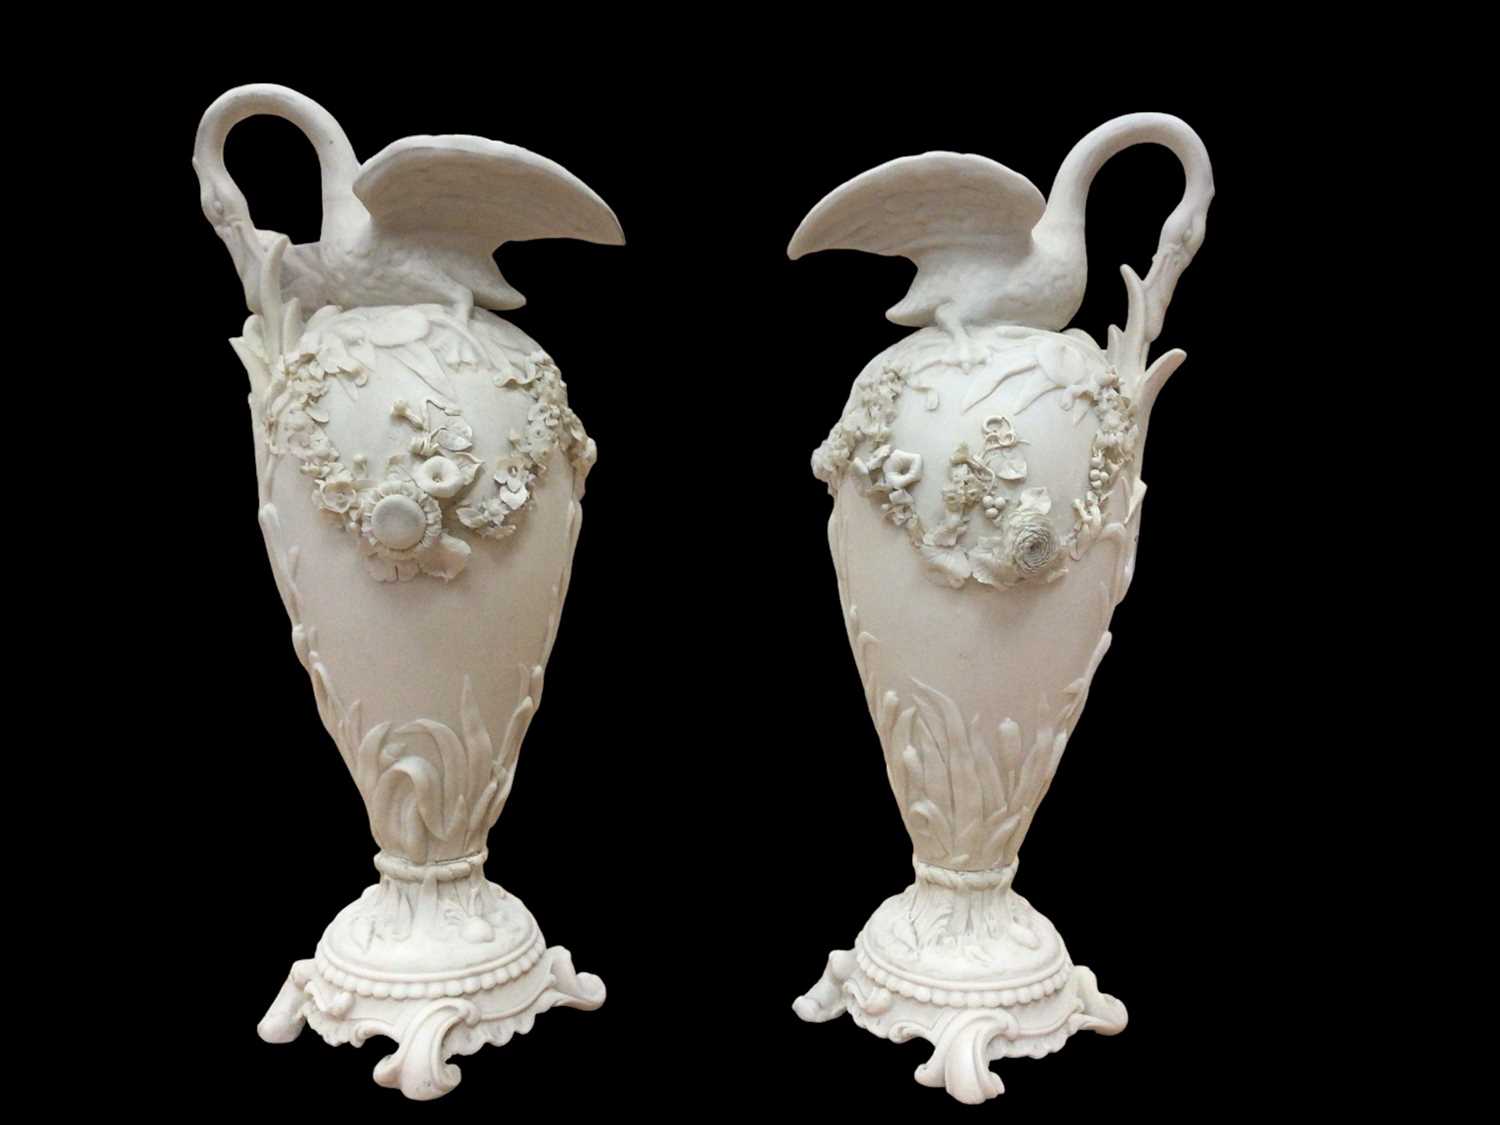 Lot 38 - Pair of 19th century French white ewers mounted with swans